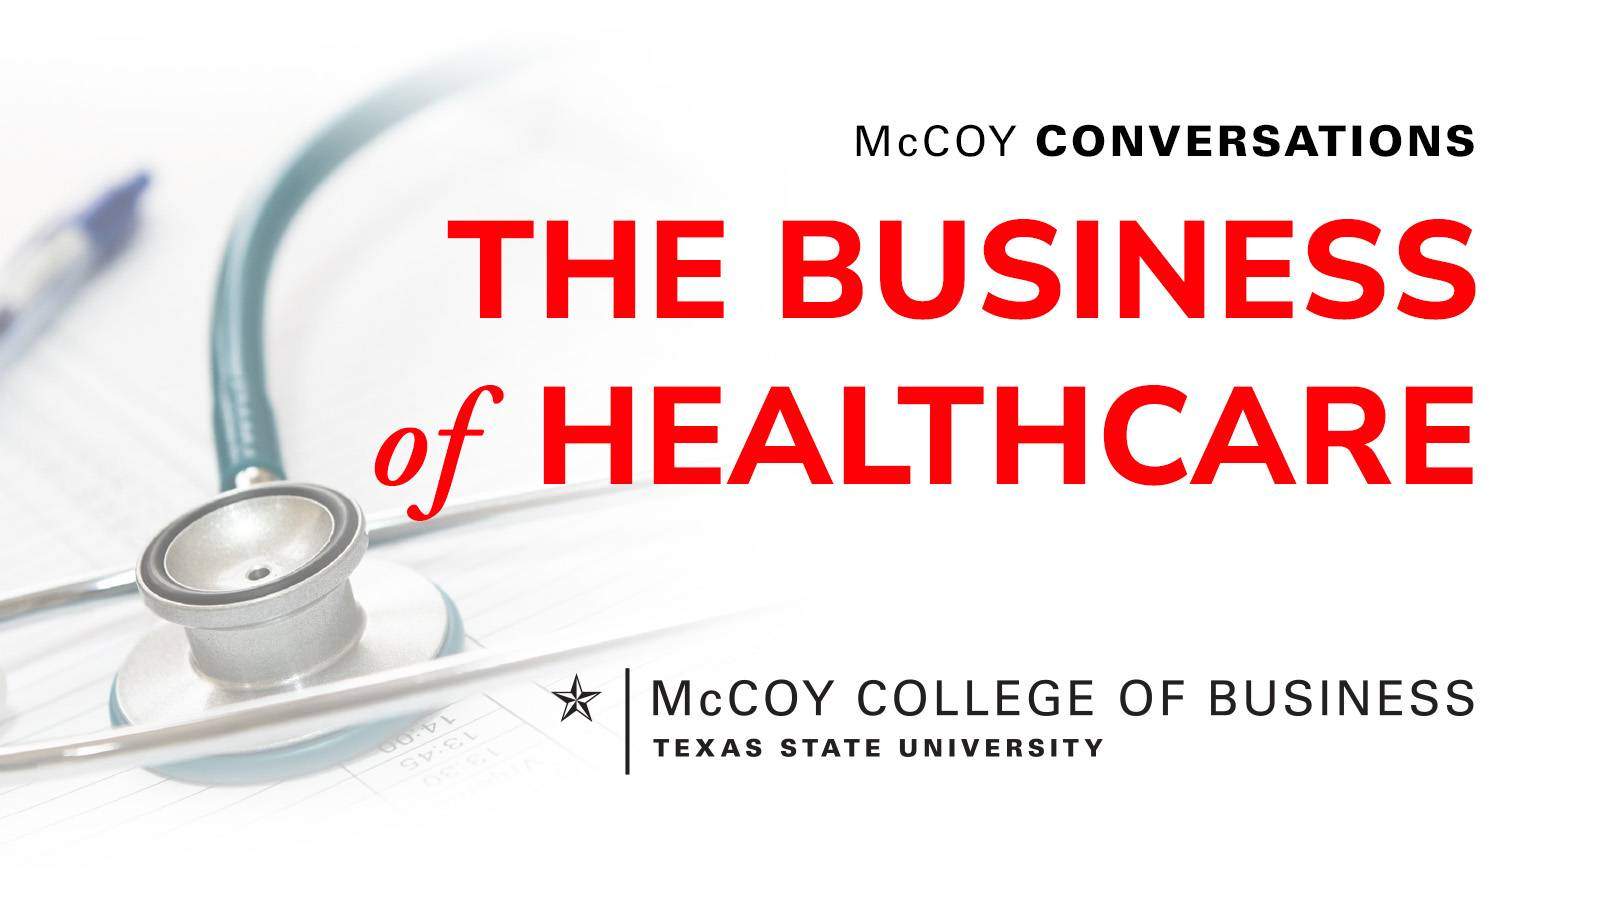 Stethoscope on white paper with red text overlay: "McCoy Conversations: The Business of Healthcare"